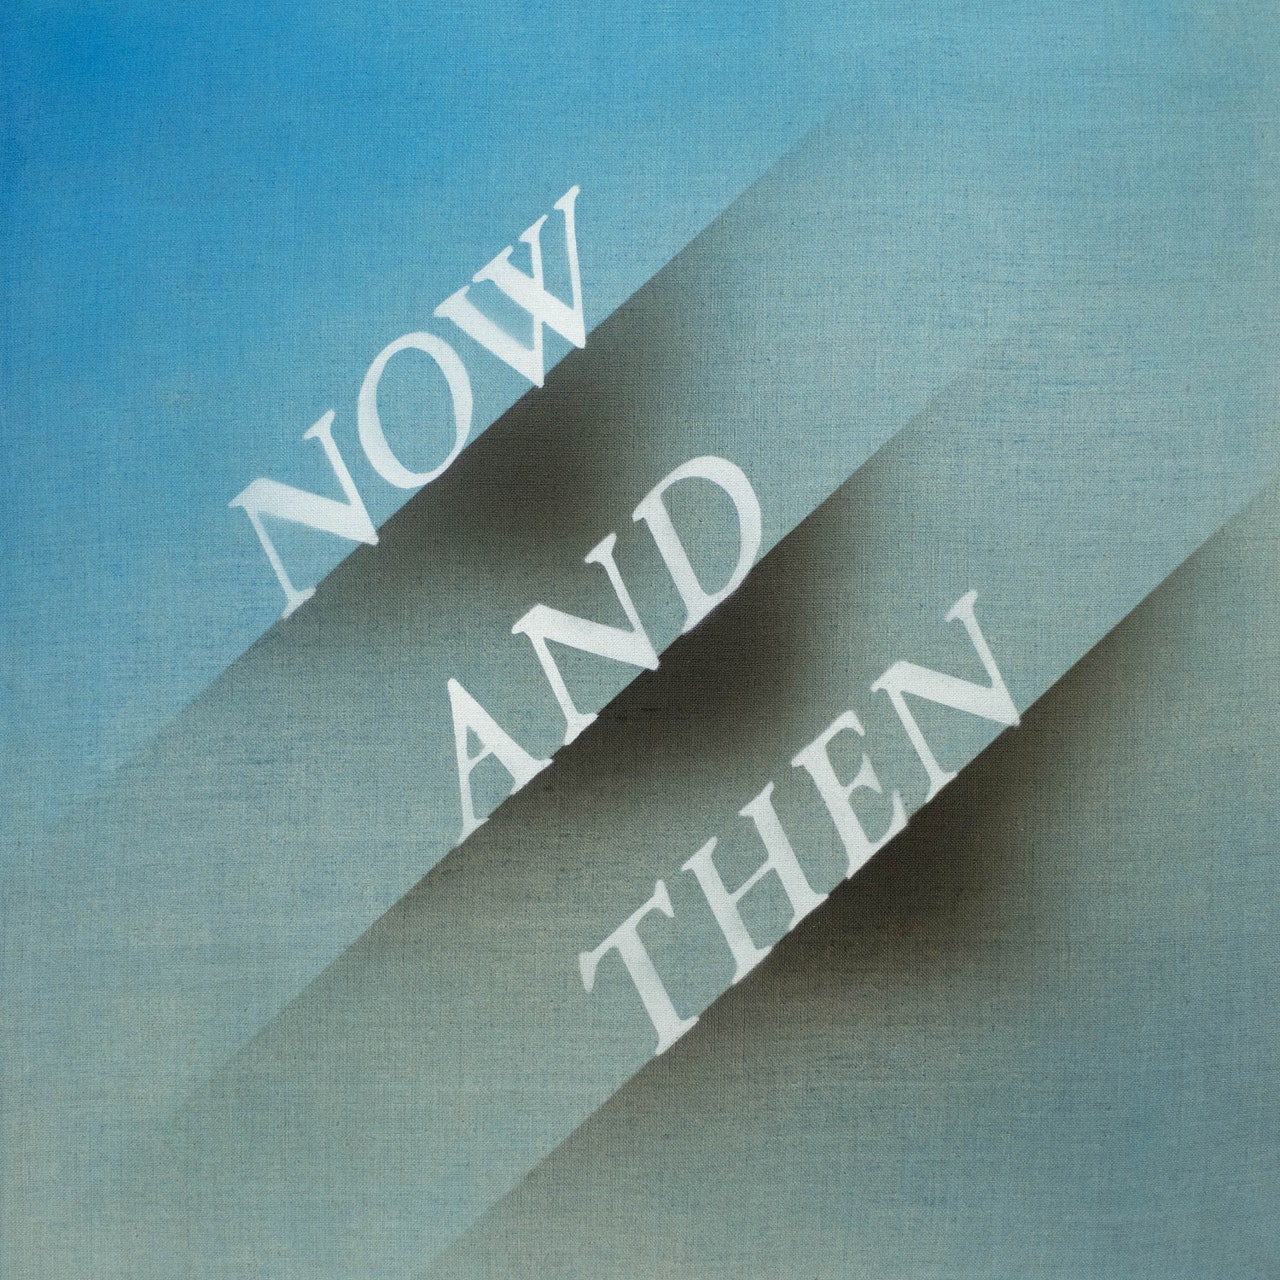 The Beatles - Now and Then single cover